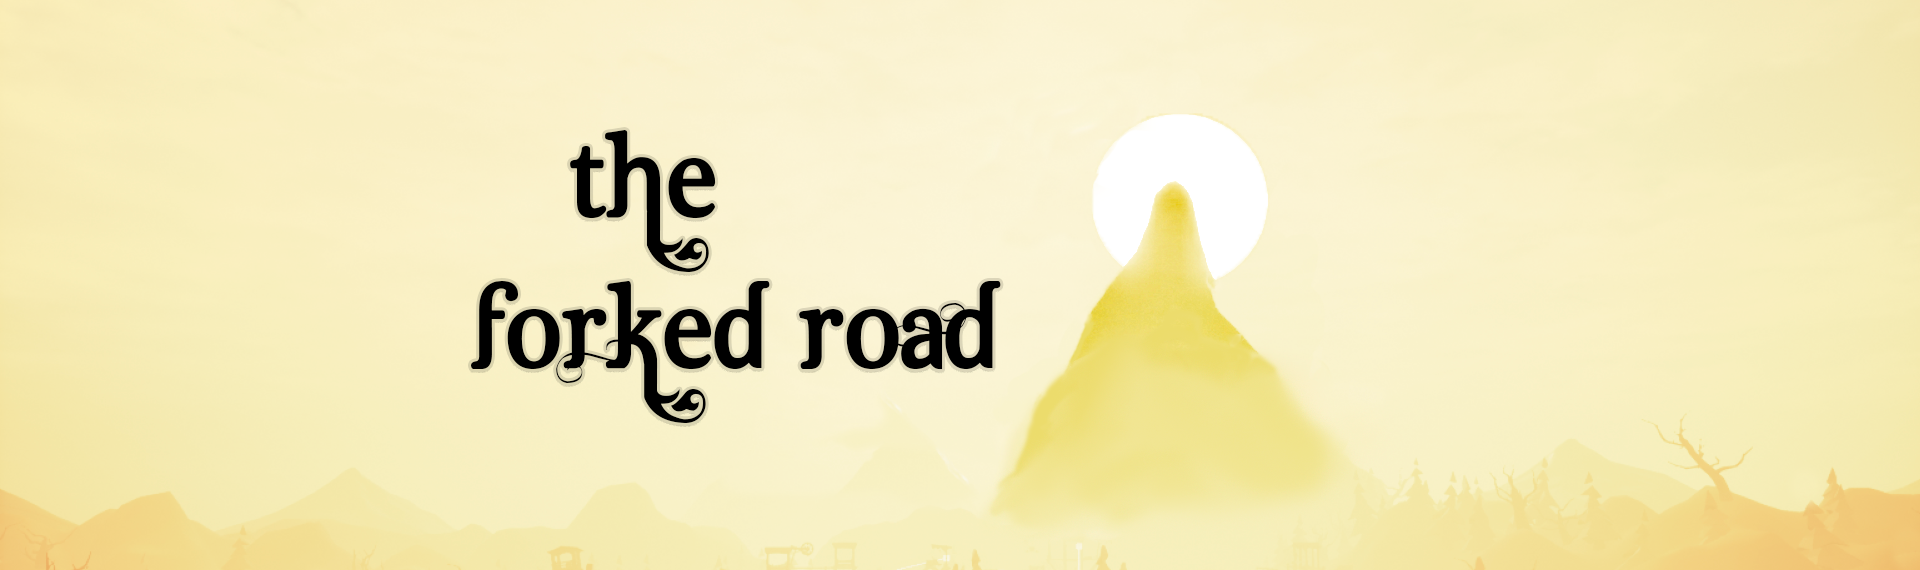 The Forked Road